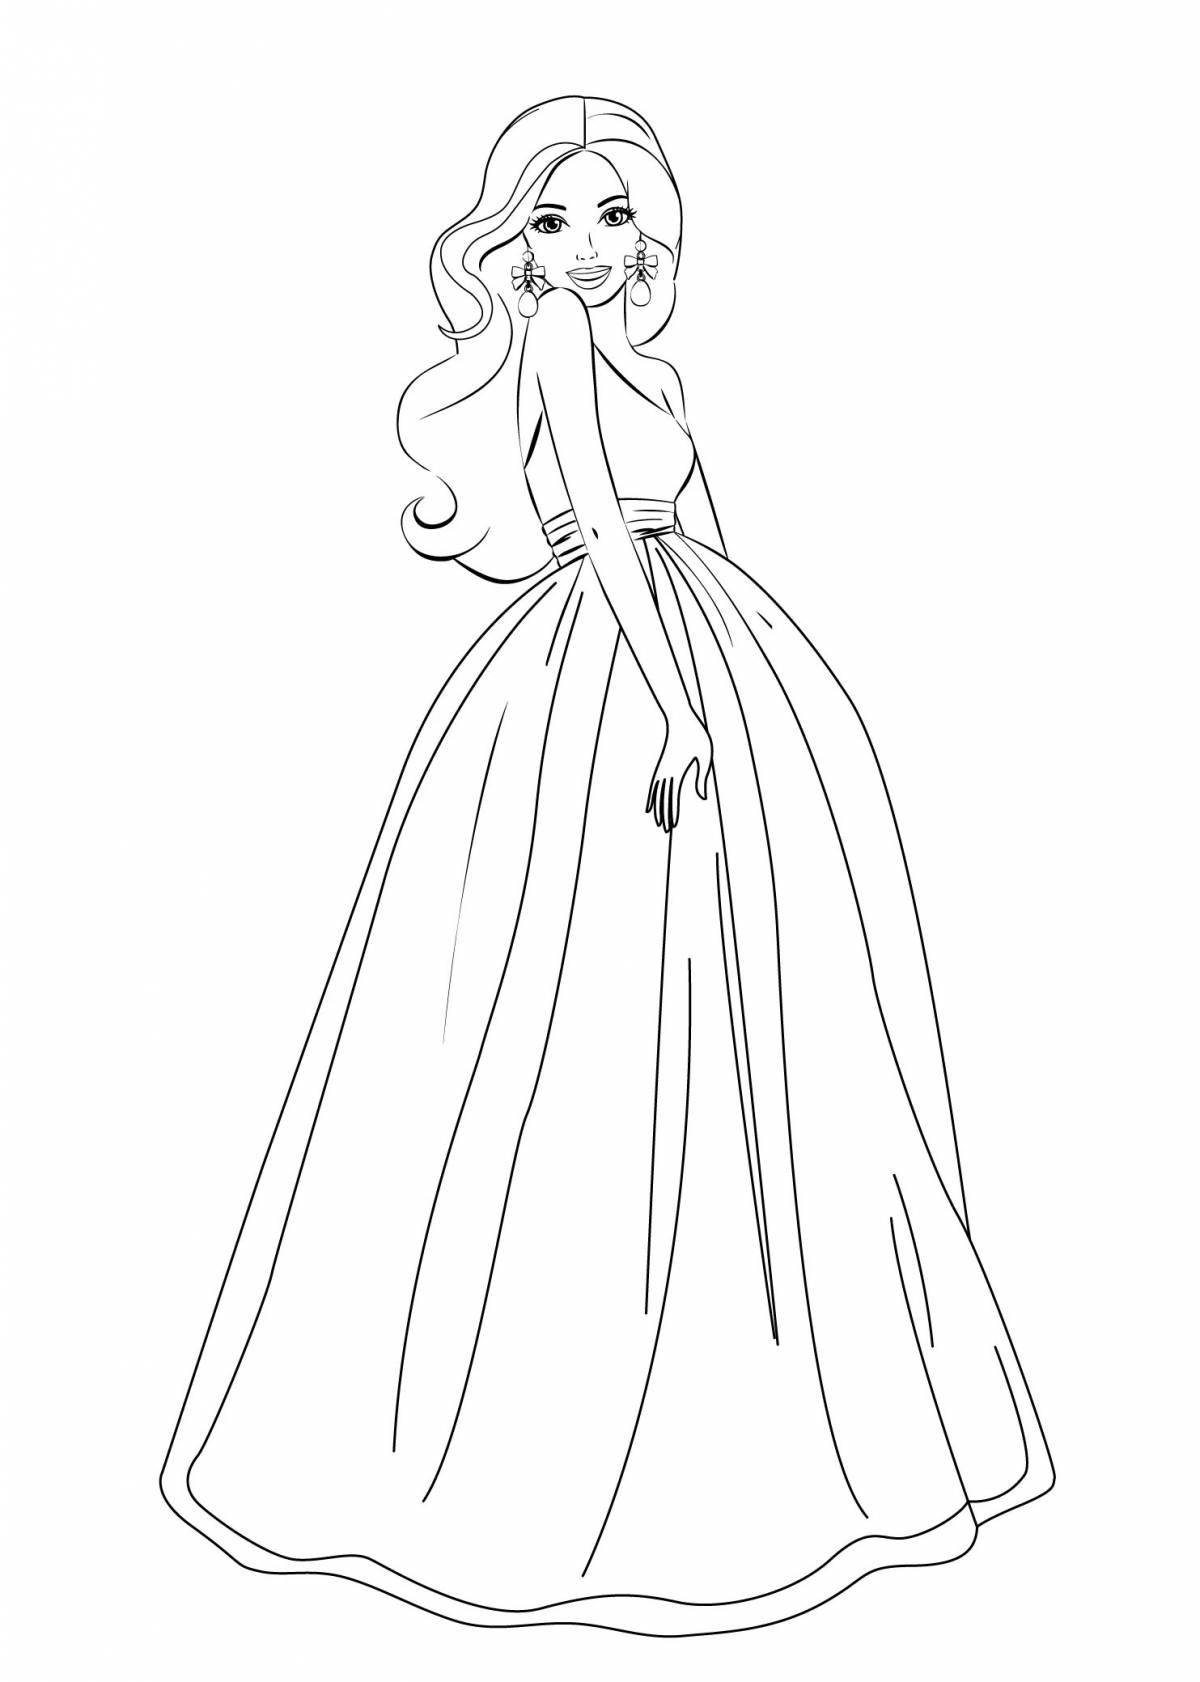 Amazing coloring book of a girl in a long dress